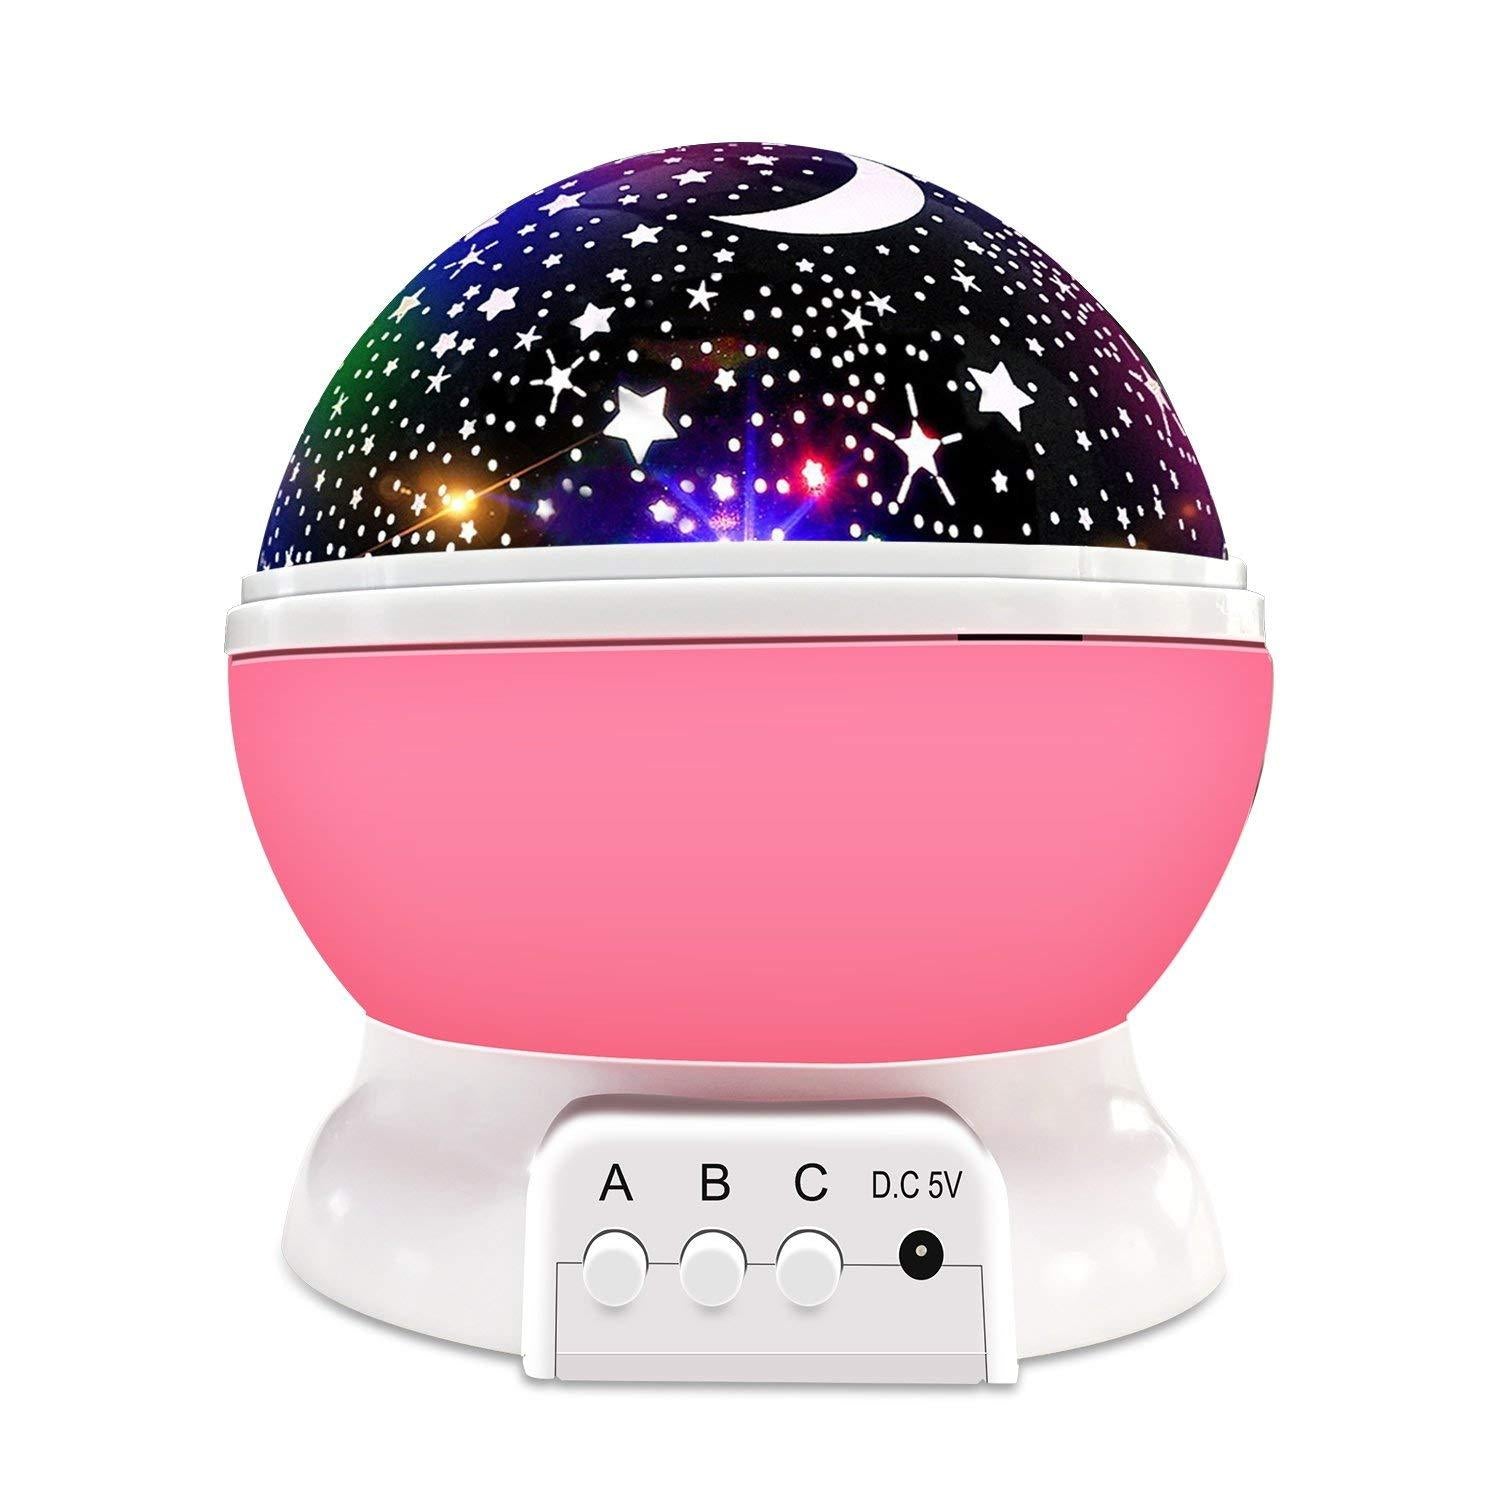 Starry Night Light Projector Rotating Moon And Star Lighting Mood Changing Lamp For Kids Pink